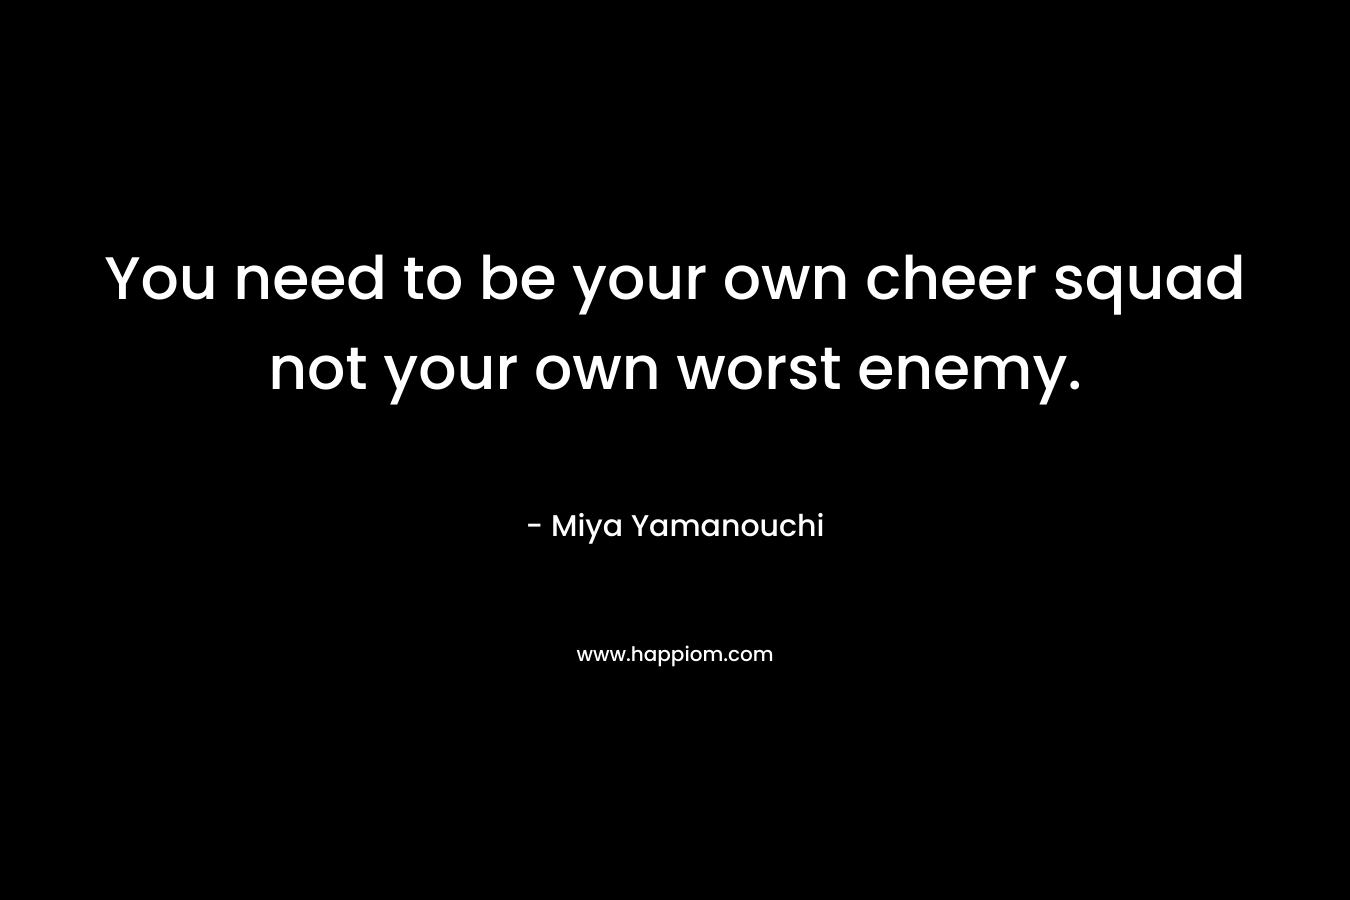 You need to be your own cheer squad not your own worst enemy.